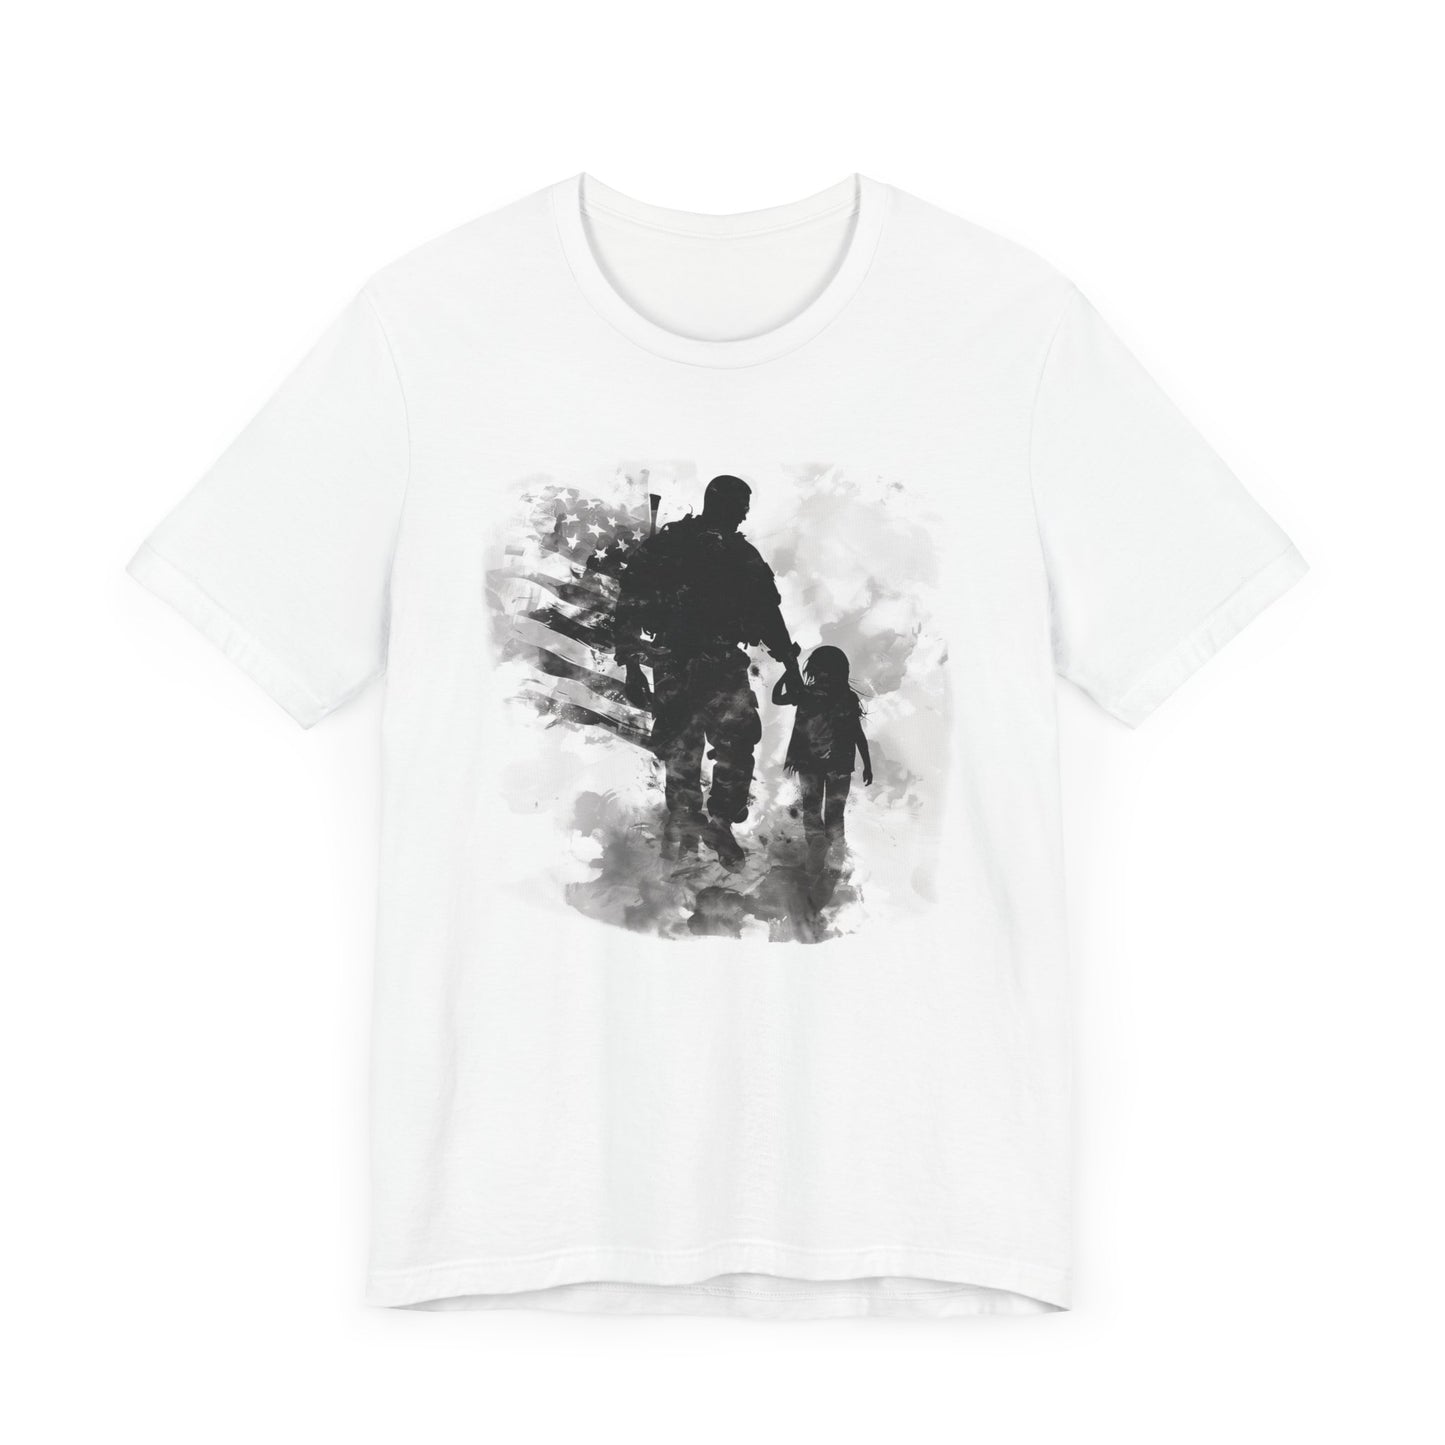 Father's Day Shirt, Soldier Father Shirt, Soldier Dad Shirt, Veteran Shirt, Oversea Soldier Shirt, Soldier Return Home Shirt, Gift for Dad